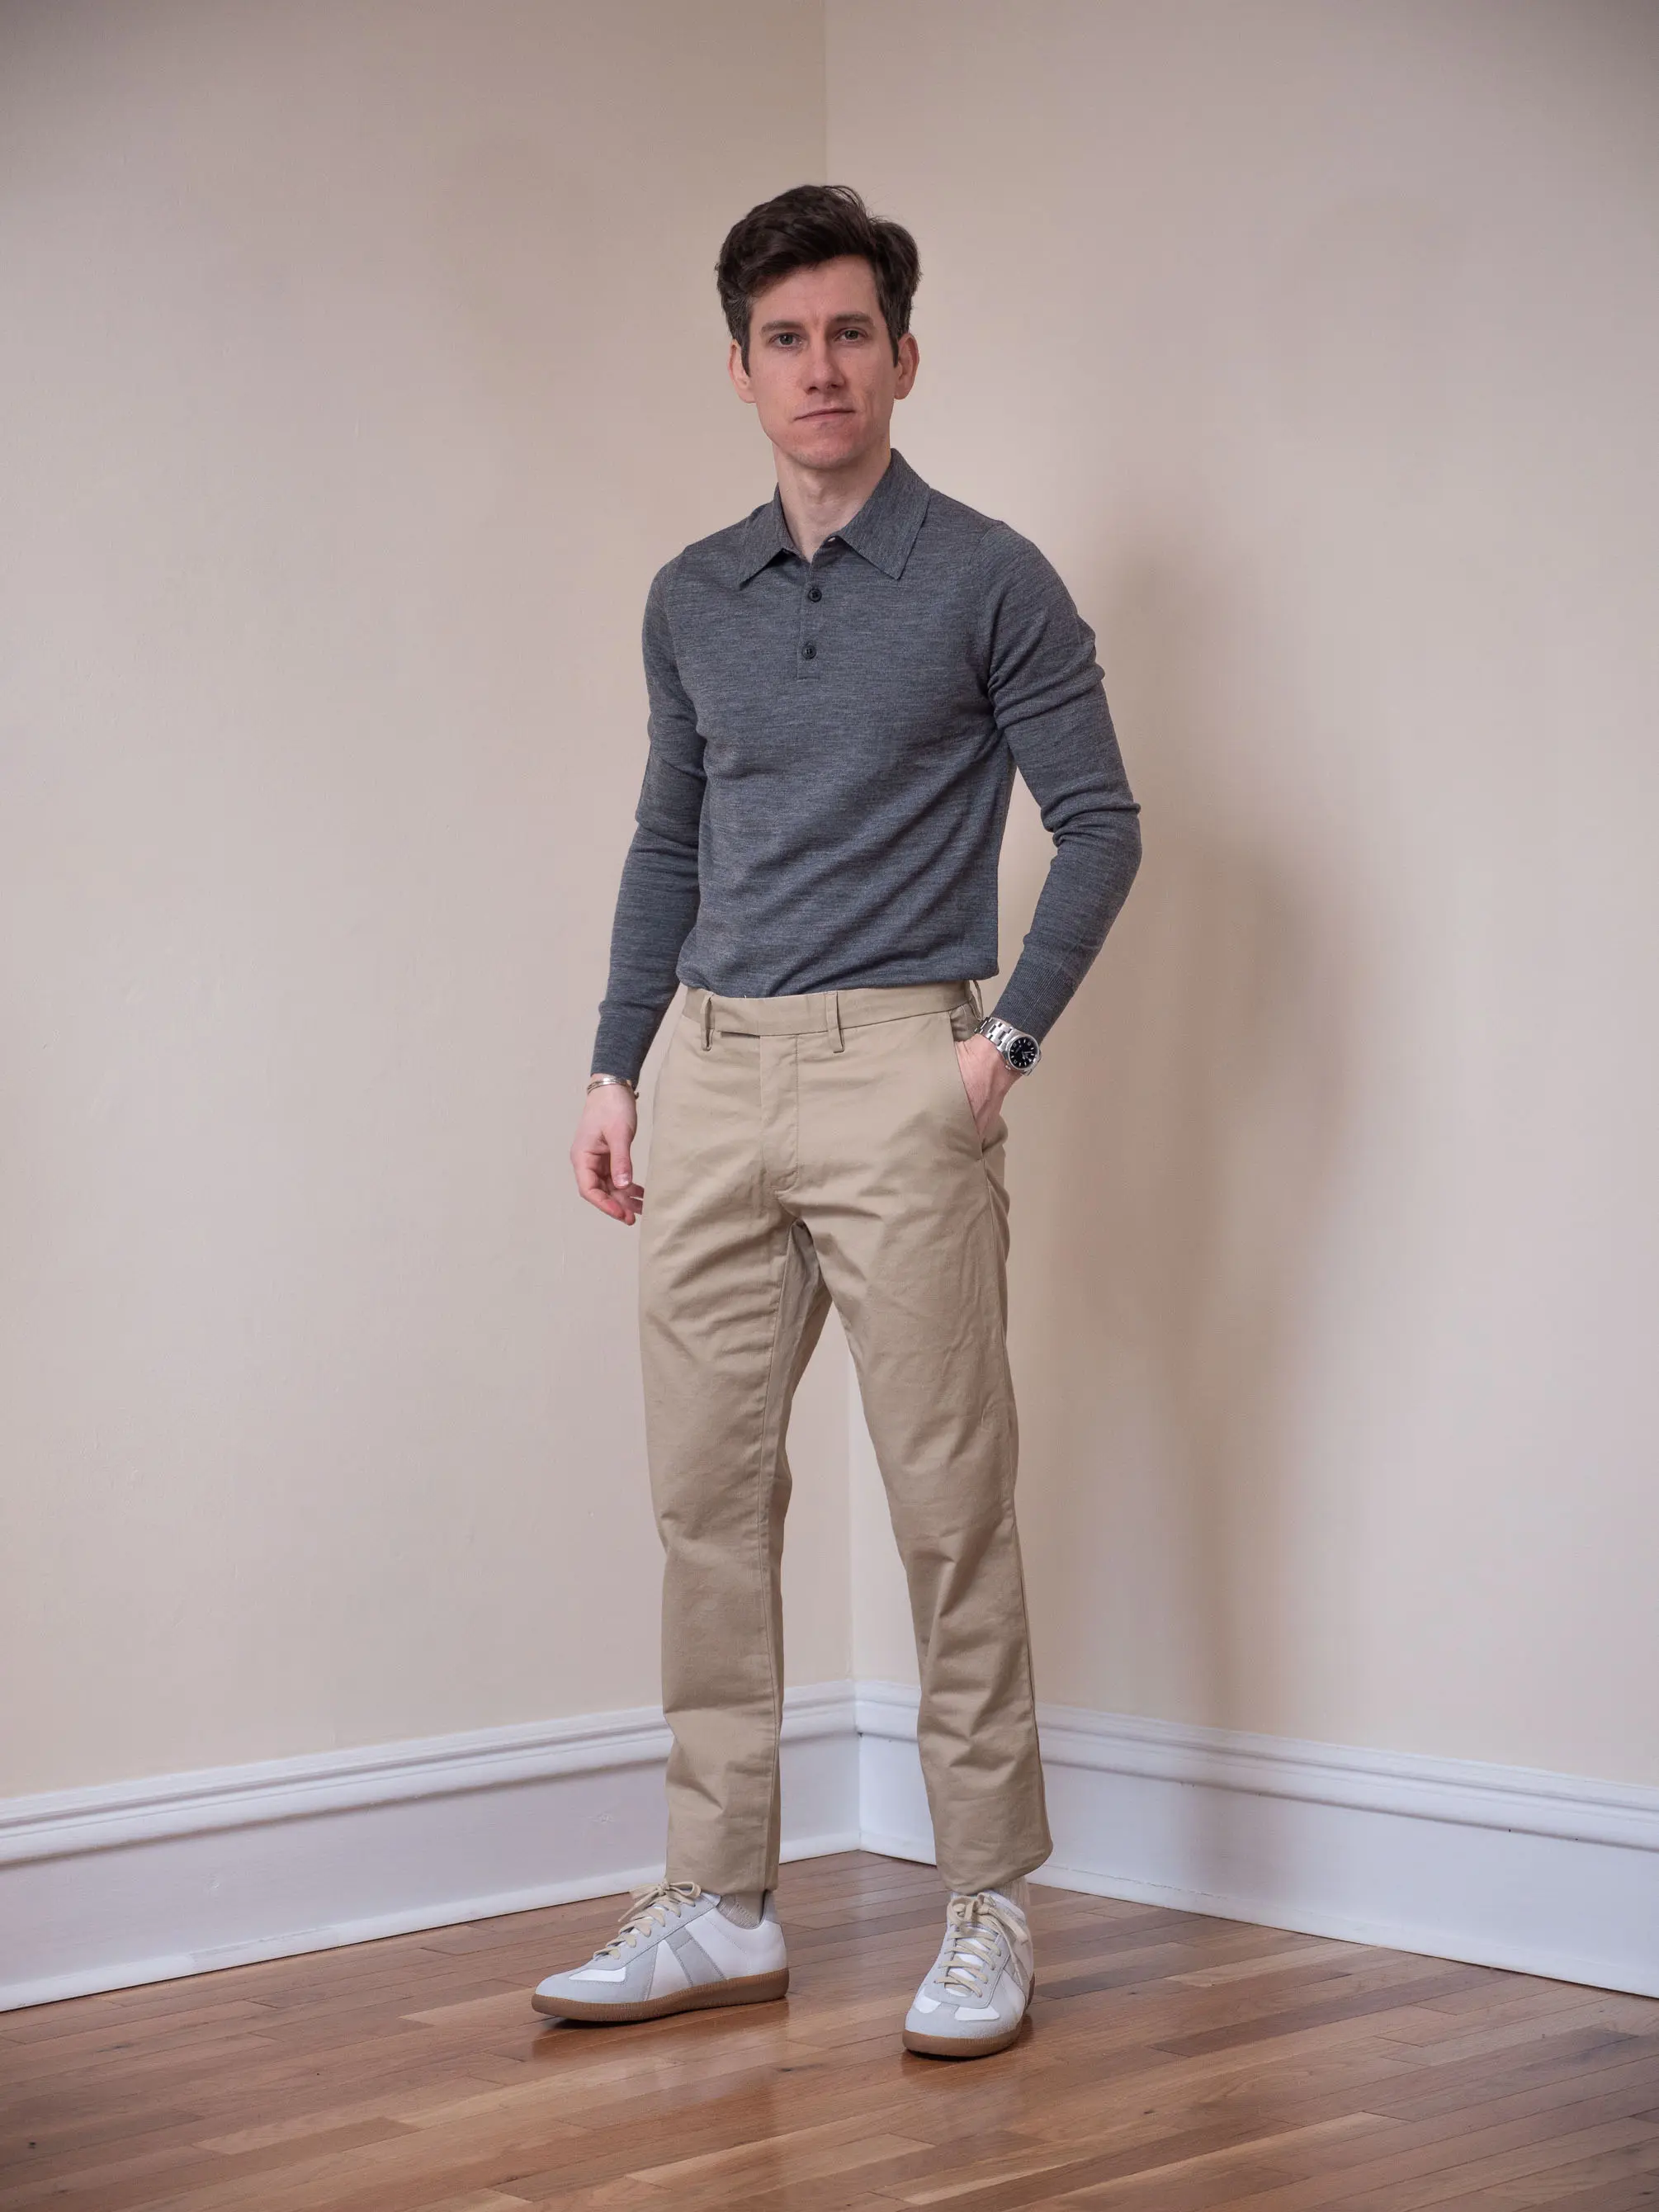 slag Brandmand Udgående How to Wear Chinos: Everything You Need to Know